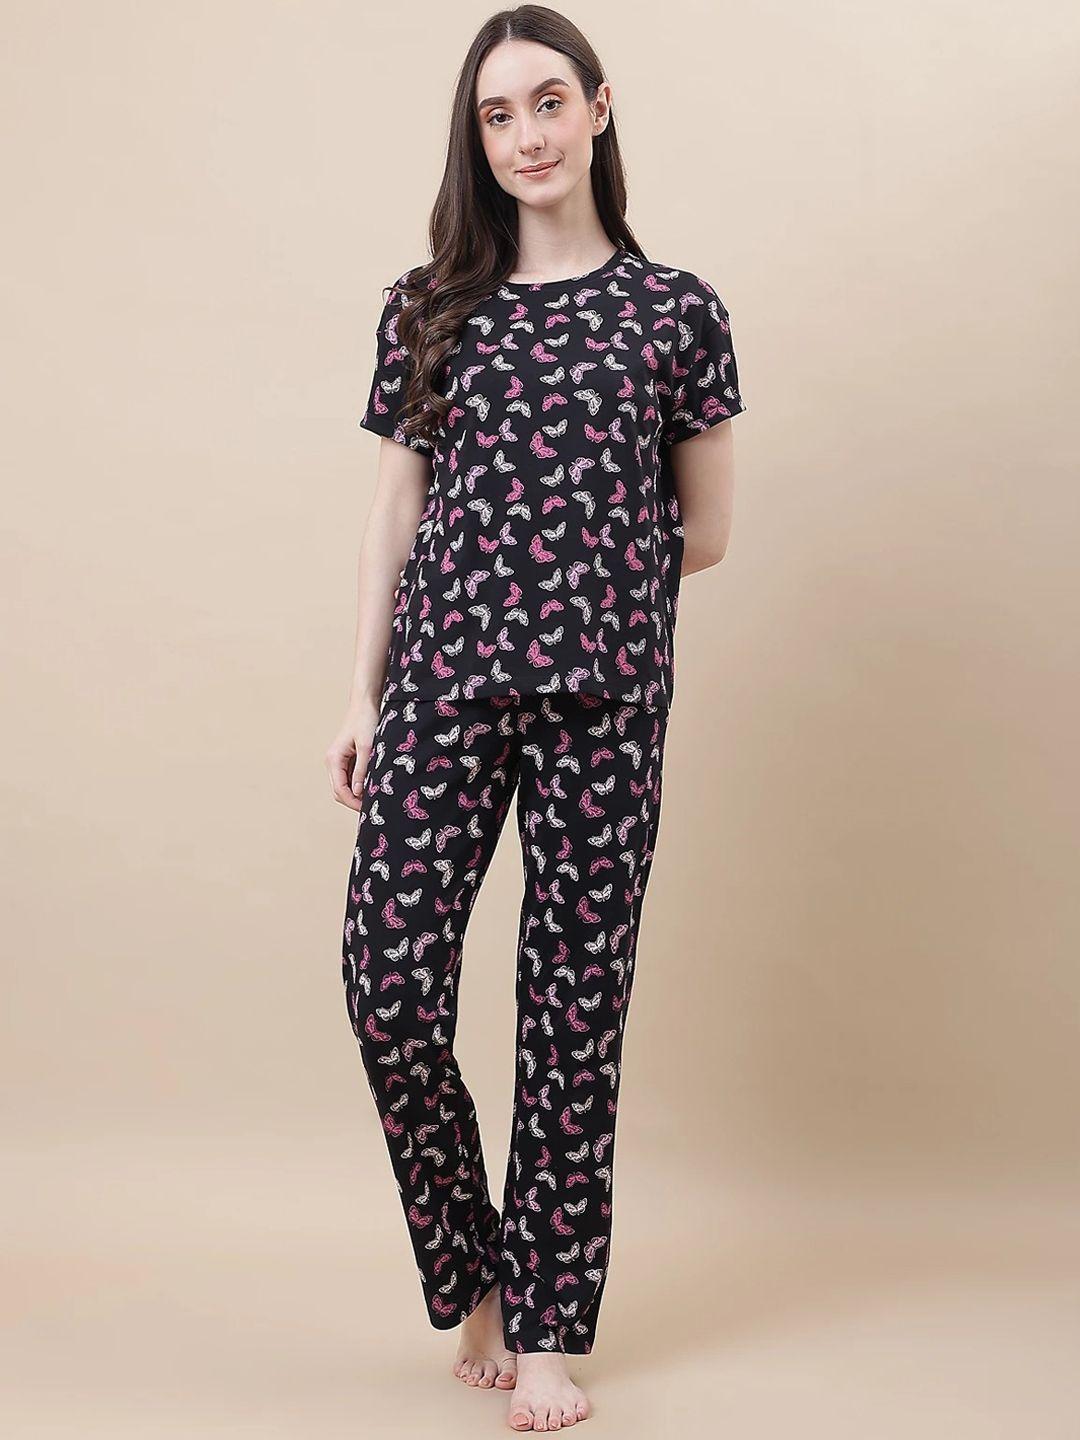 marks & spencer conversational printed pure cotton night suit